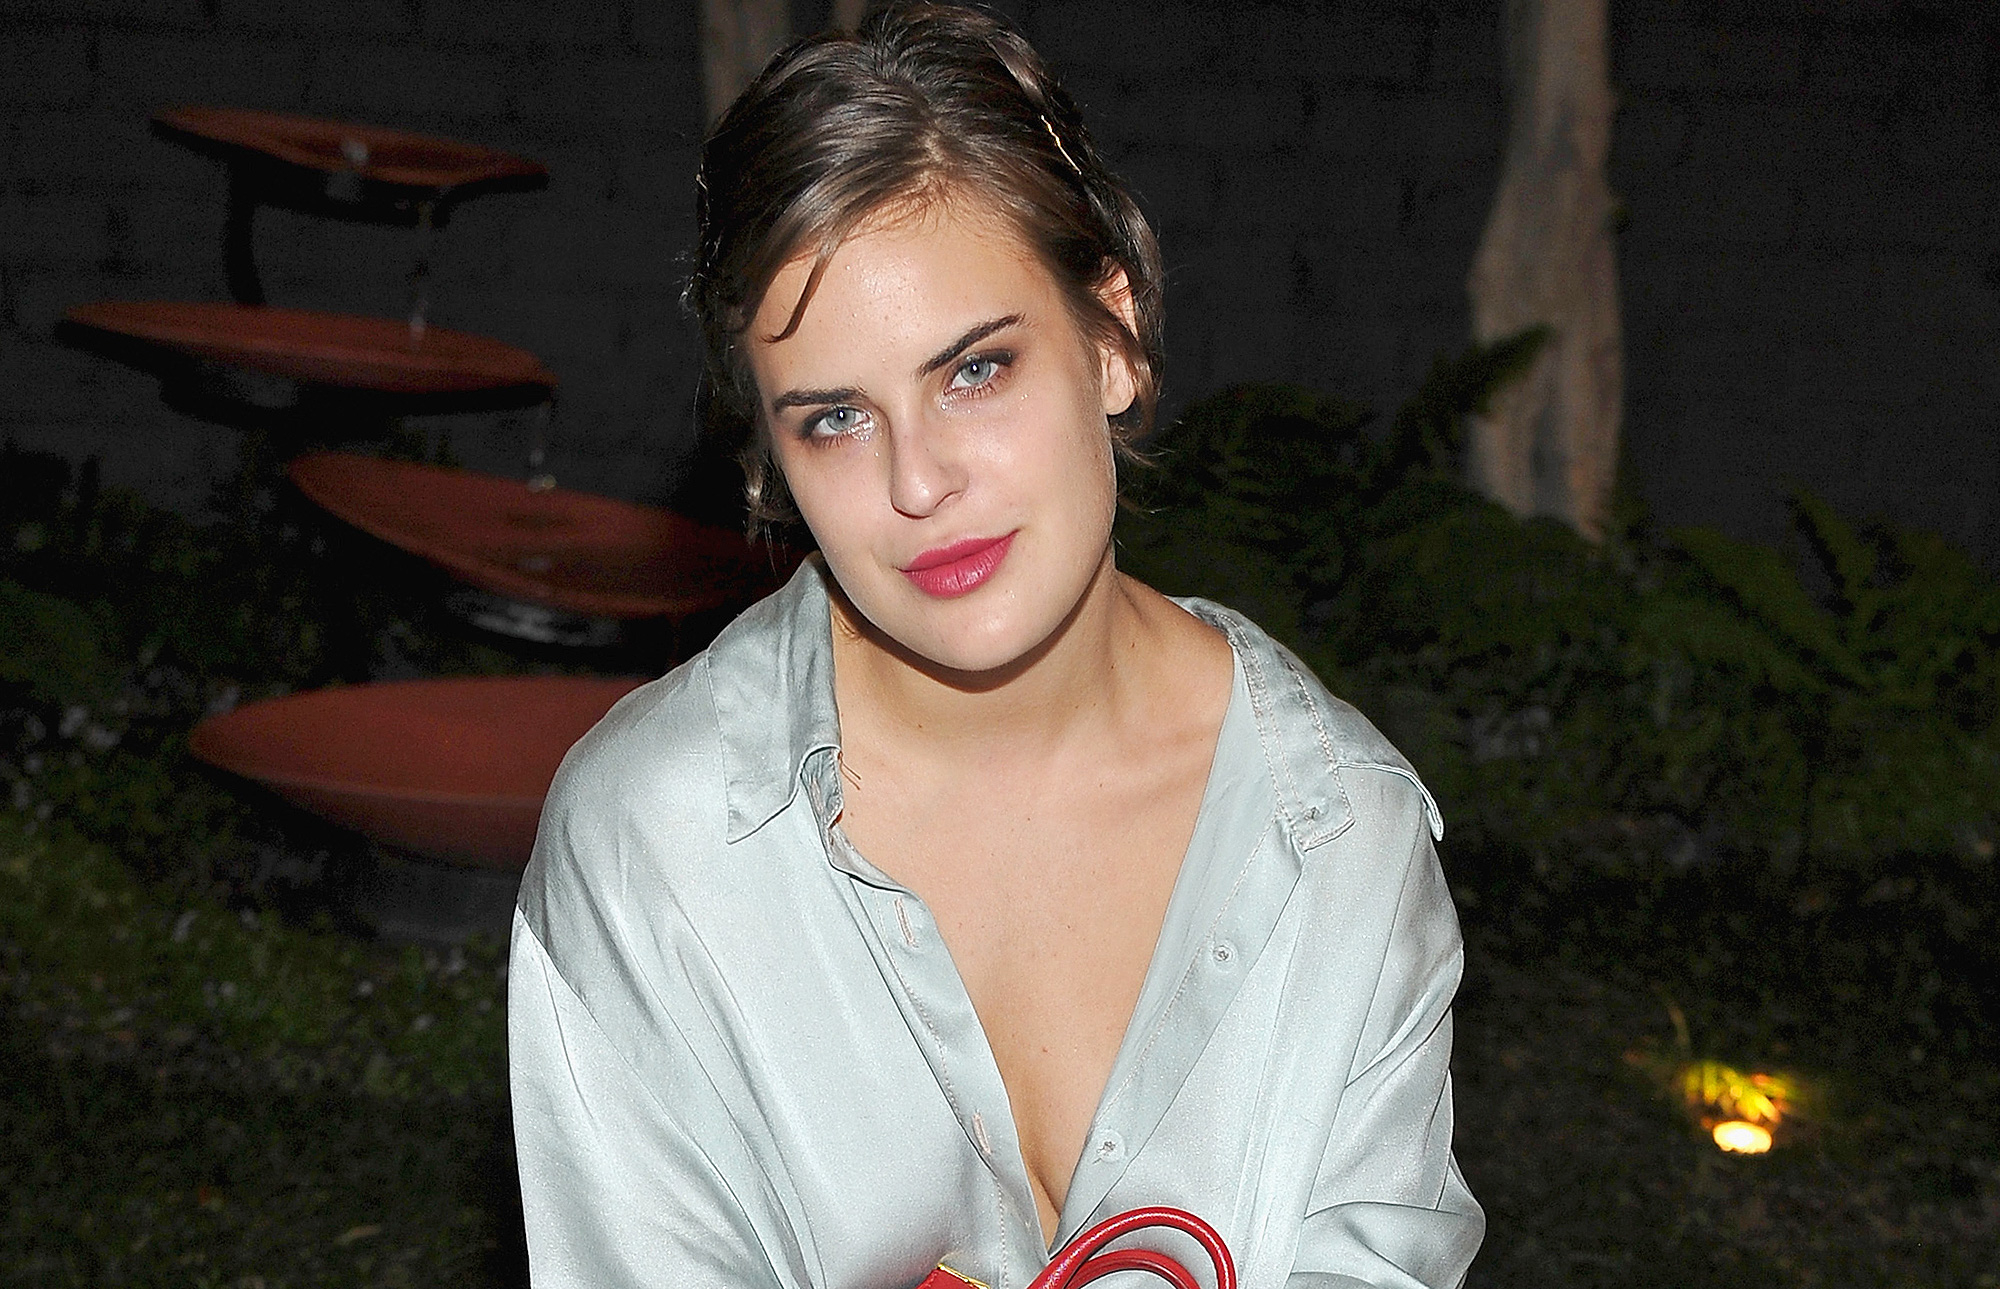 Tallulah Willis on Sobriety and Battling an Eating Disorder